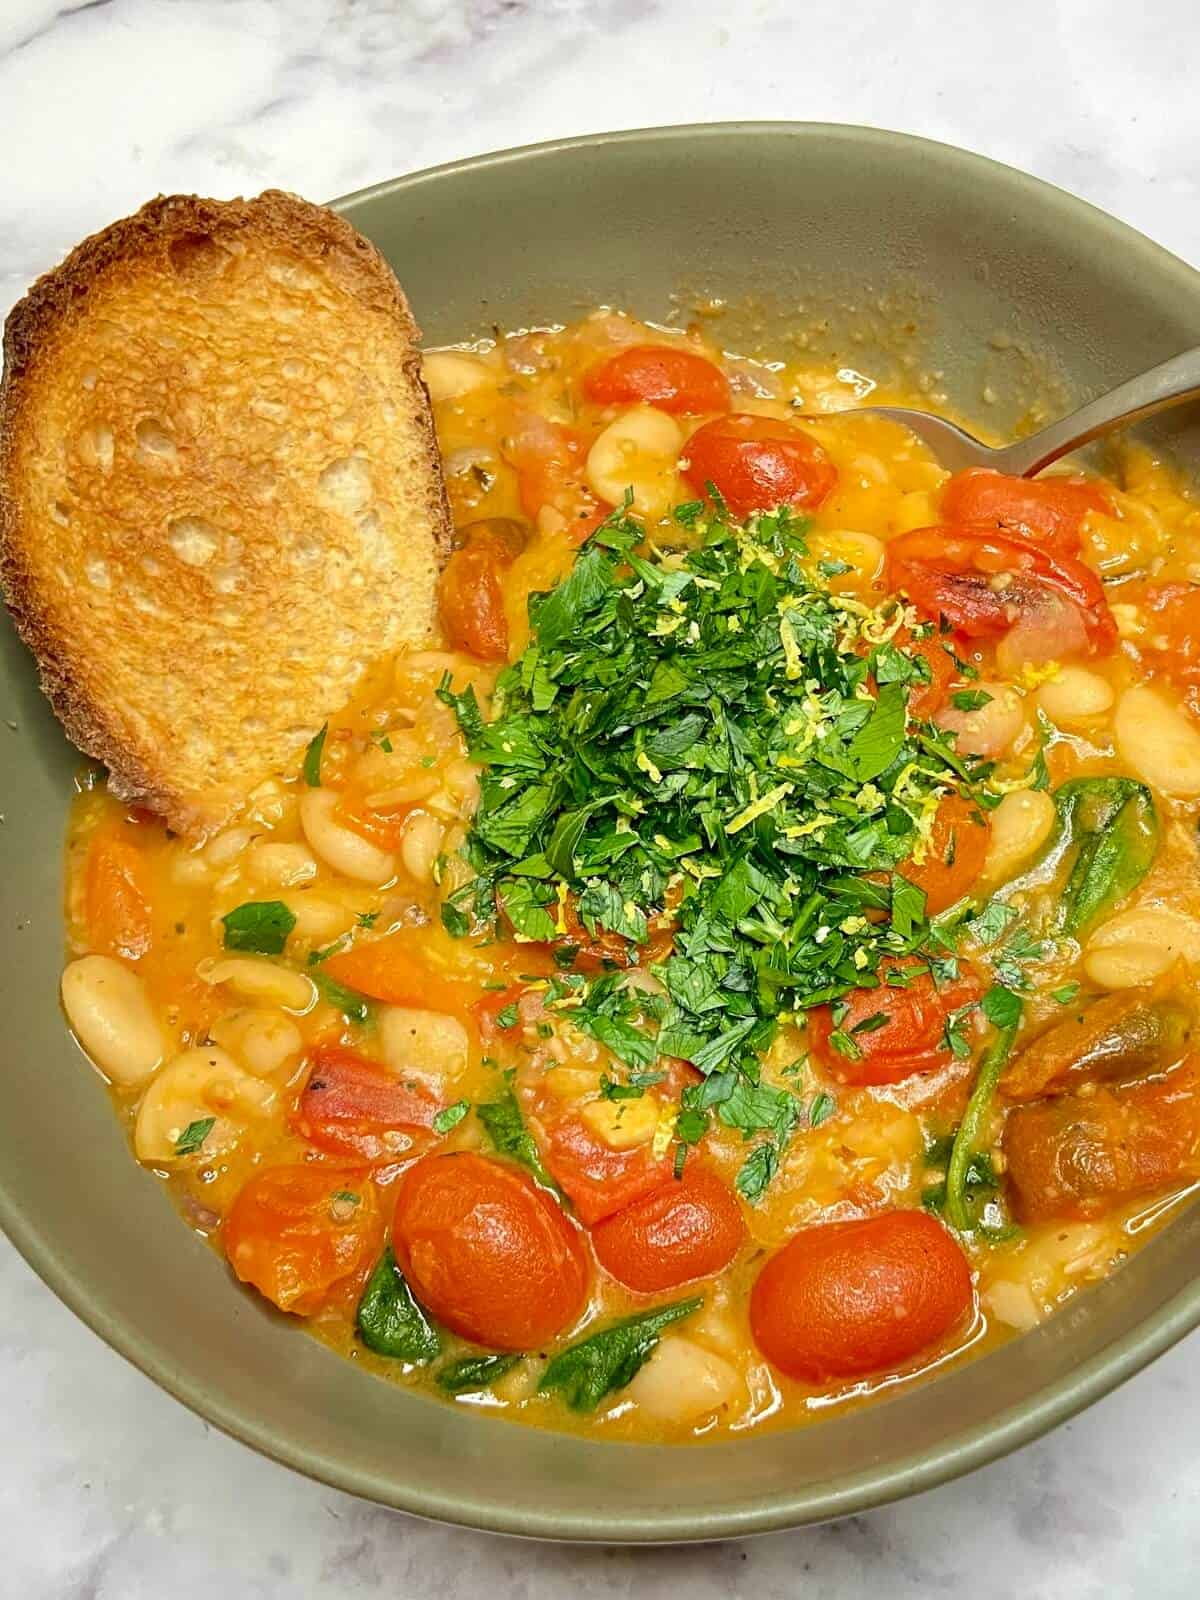 Roasted Tomato and White Bean Stew (Photo by Erich Boenzli)